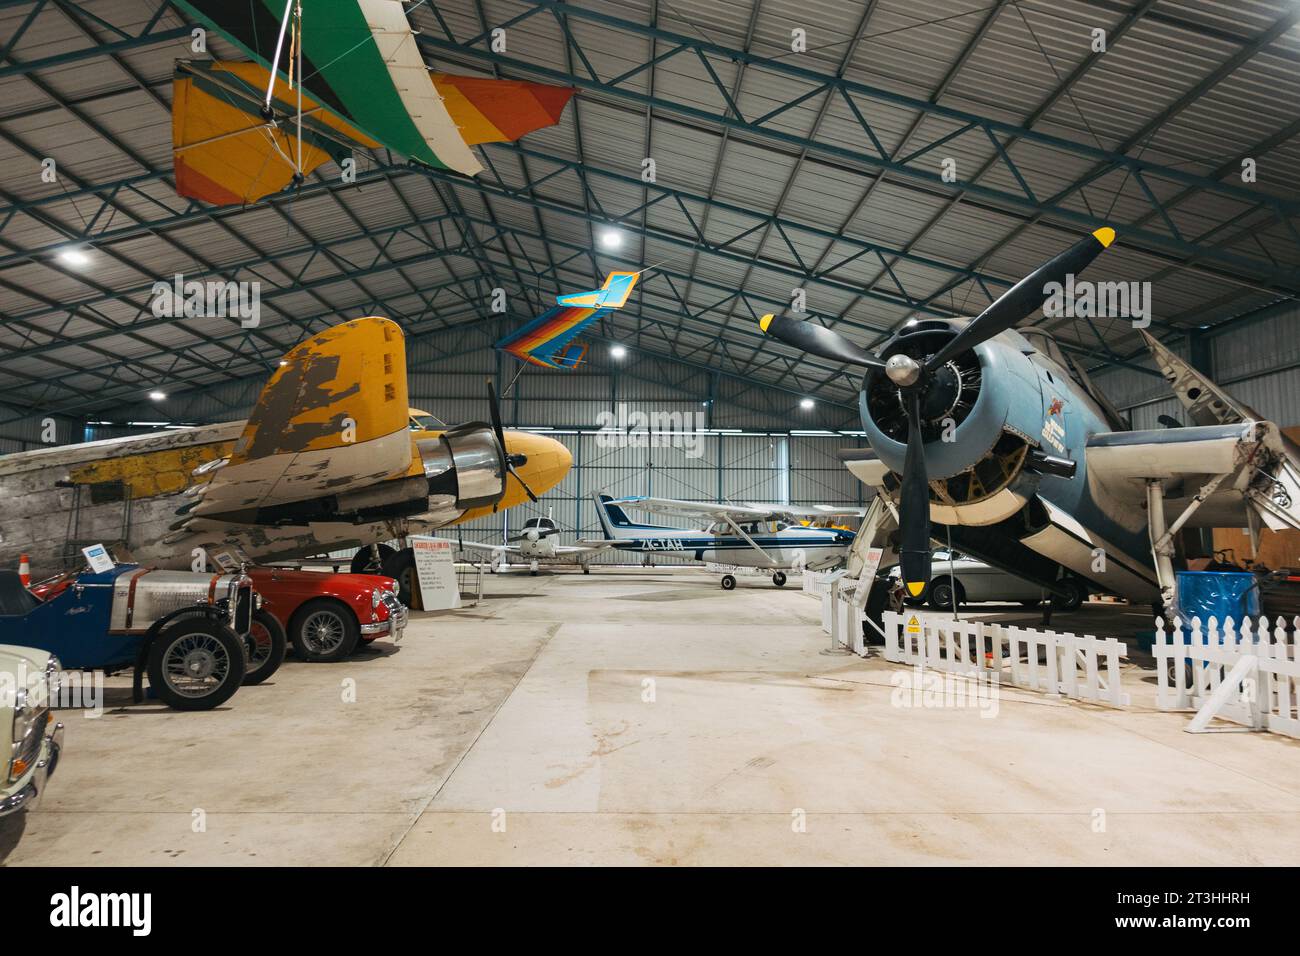 historic aircraft and cars on display at the Tairāwhiti Aviation Museum, Gisborne, New Zealand Stock Photo